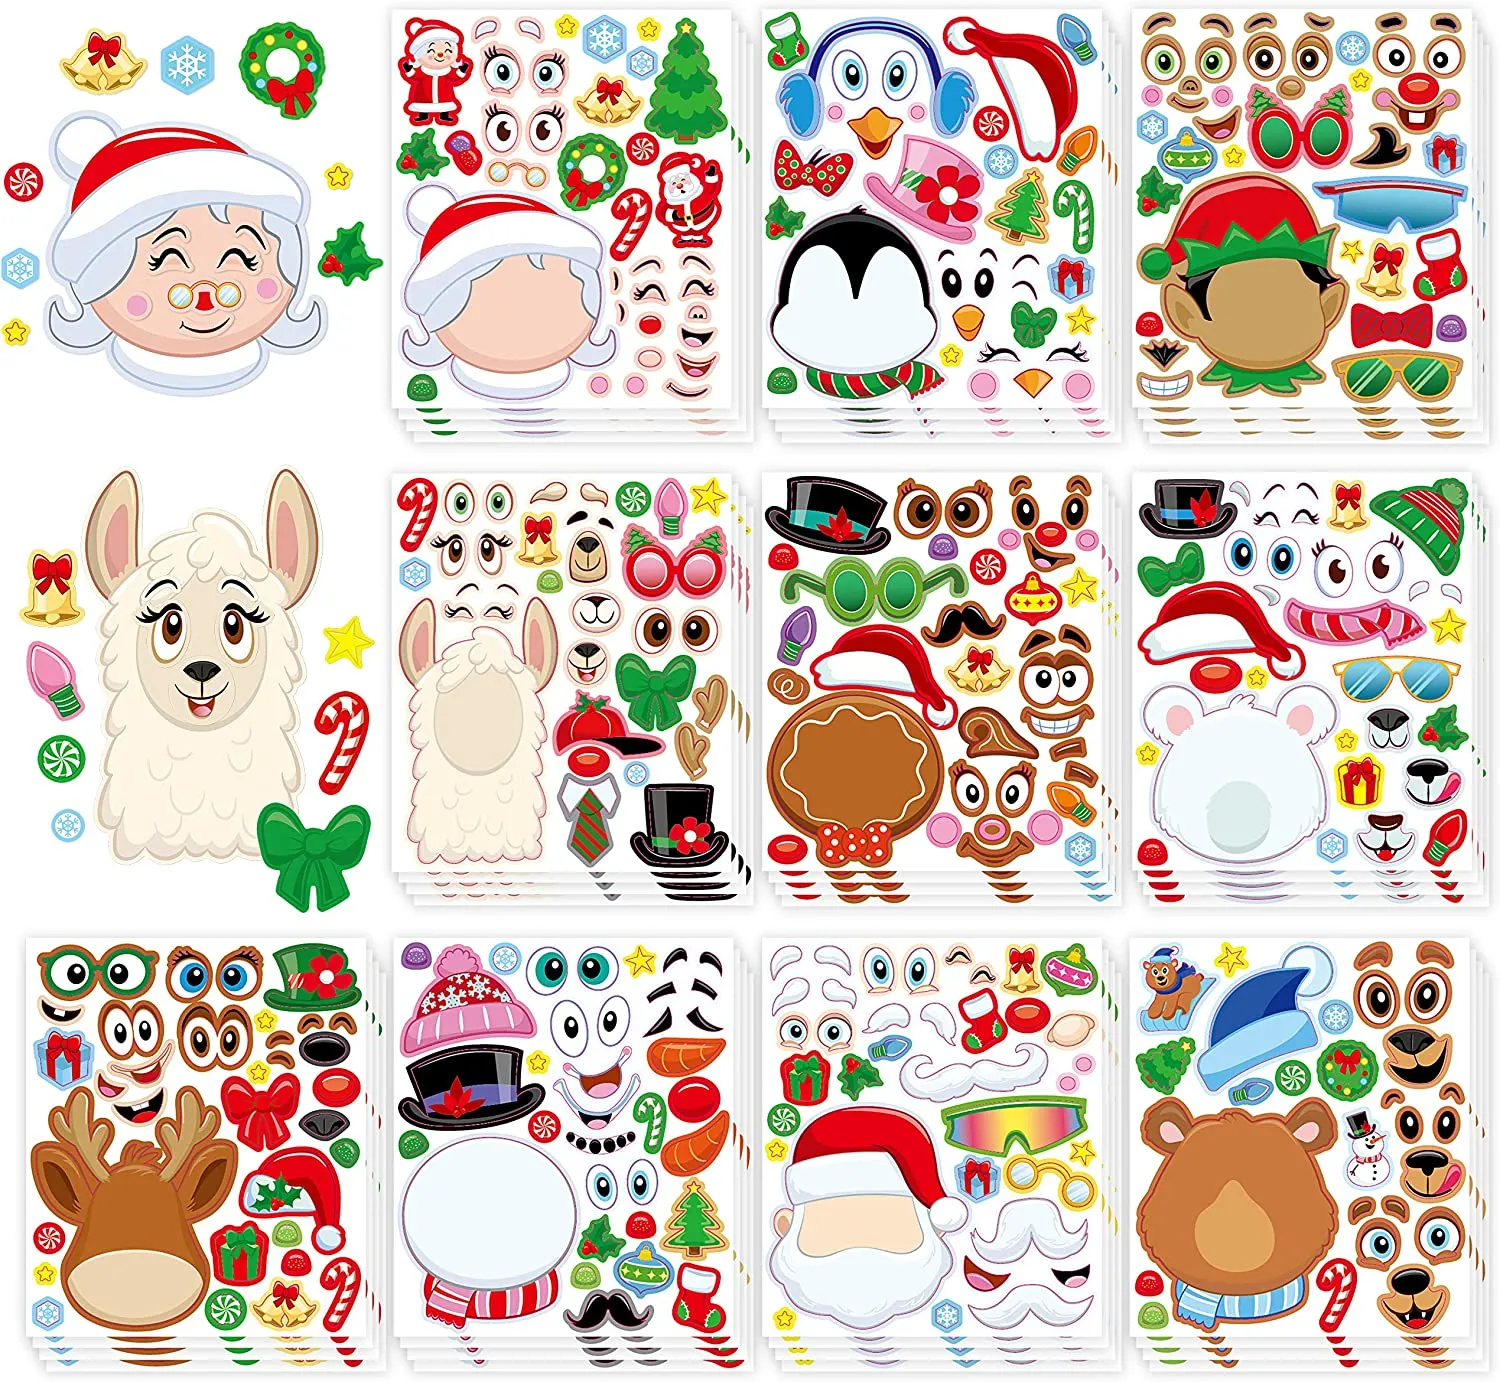 10-50Pcs Merry Christmas Gift Cards Greeting Card Christmas Tree Stickers  Cute Design For 2022 New